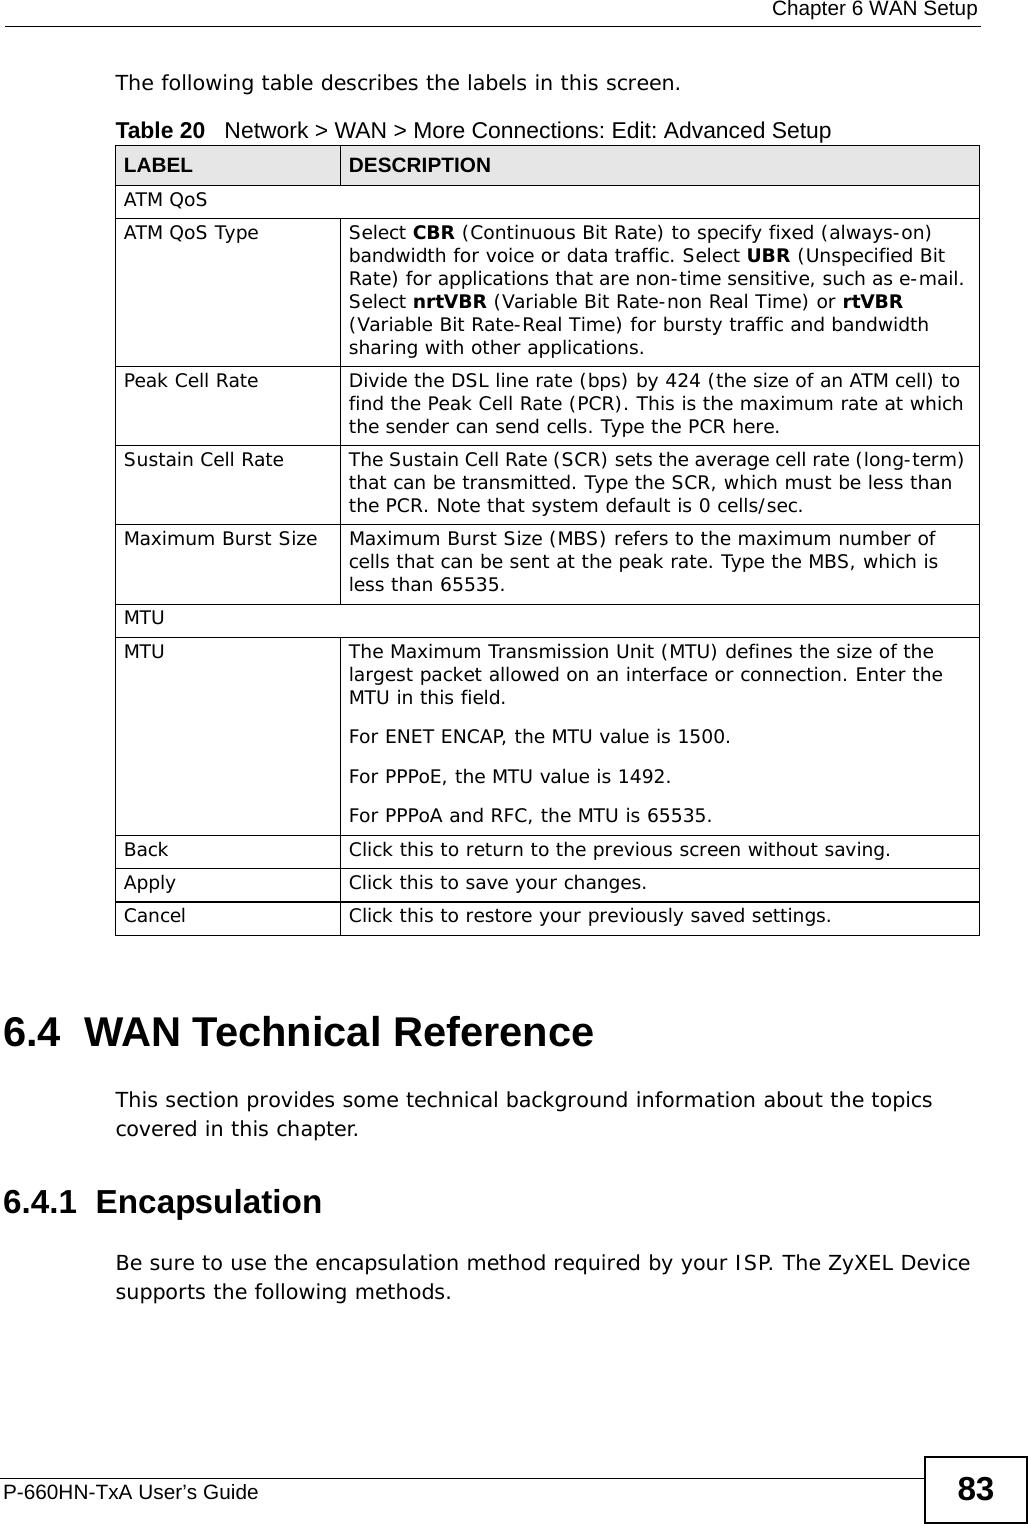  Chapter 6 WAN SetupP-660HN-TxA User’s Guide 83The following table describes the labels in this screen. 6.4  WAN Technical ReferenceThis section provides some technical background information about the topics covered in this chapter.6.4.1  EncapsulationBe sure to use the encapsulation method required by your ISP. The ZyXEL Device supports the following methods.Table 20   Network &gt; WAN &gt; More Connections: Edit: Advanced SetupLABEL DESCRIPTIONATM QoSATM QoS Type Select CBR (Continuous Bit Rate) to specify fixed (always-on) bandwidth for voice or data traffic. Select UBR (Unspecified Bit Rate) for applications that are non-time sensitive, such as e-mail. Select nrtVBR (Variable Bit Rate-non Real Time) or rtVBR (Variable Bit Rate-Real Time) for bursty traffic and bandwidth sharing with other applications. Peak Cell Rate Divide the DSL line rate (bps) by 424 (the size of an ATM cell) to find the Peak Cell Rate (PCR). This is the maximum rate at which the sender can send cells. Type the PCR here.Sustain Cell Rate The Sustain Cell Rate (SCR) sets the average cell rate (long-term) that can be transmitted. Type the SCR, which must be less than the PCR. Note that system default is 0 cells/sec. Maximum Burst Size Maximum Burst Size (MBS) refers to the maximum number of cells that can be sent at the peak rate. Type the MBS, which is less than 65535. MTUMTU The Maximum Transmission Unit (MTU) defines the size of the largest packet allowed on an interface or connection. Enter the MTU in this field.For ENET ENCAP, the MTU value is 1500.For PPPoE, the MTU value is 1492.For PPPoA and RFC, the MTU is 65535.Back Click this to return to the previous screen without saving.Apply Click this to save your changes. Cancel Click this to restore your previously saved settings.